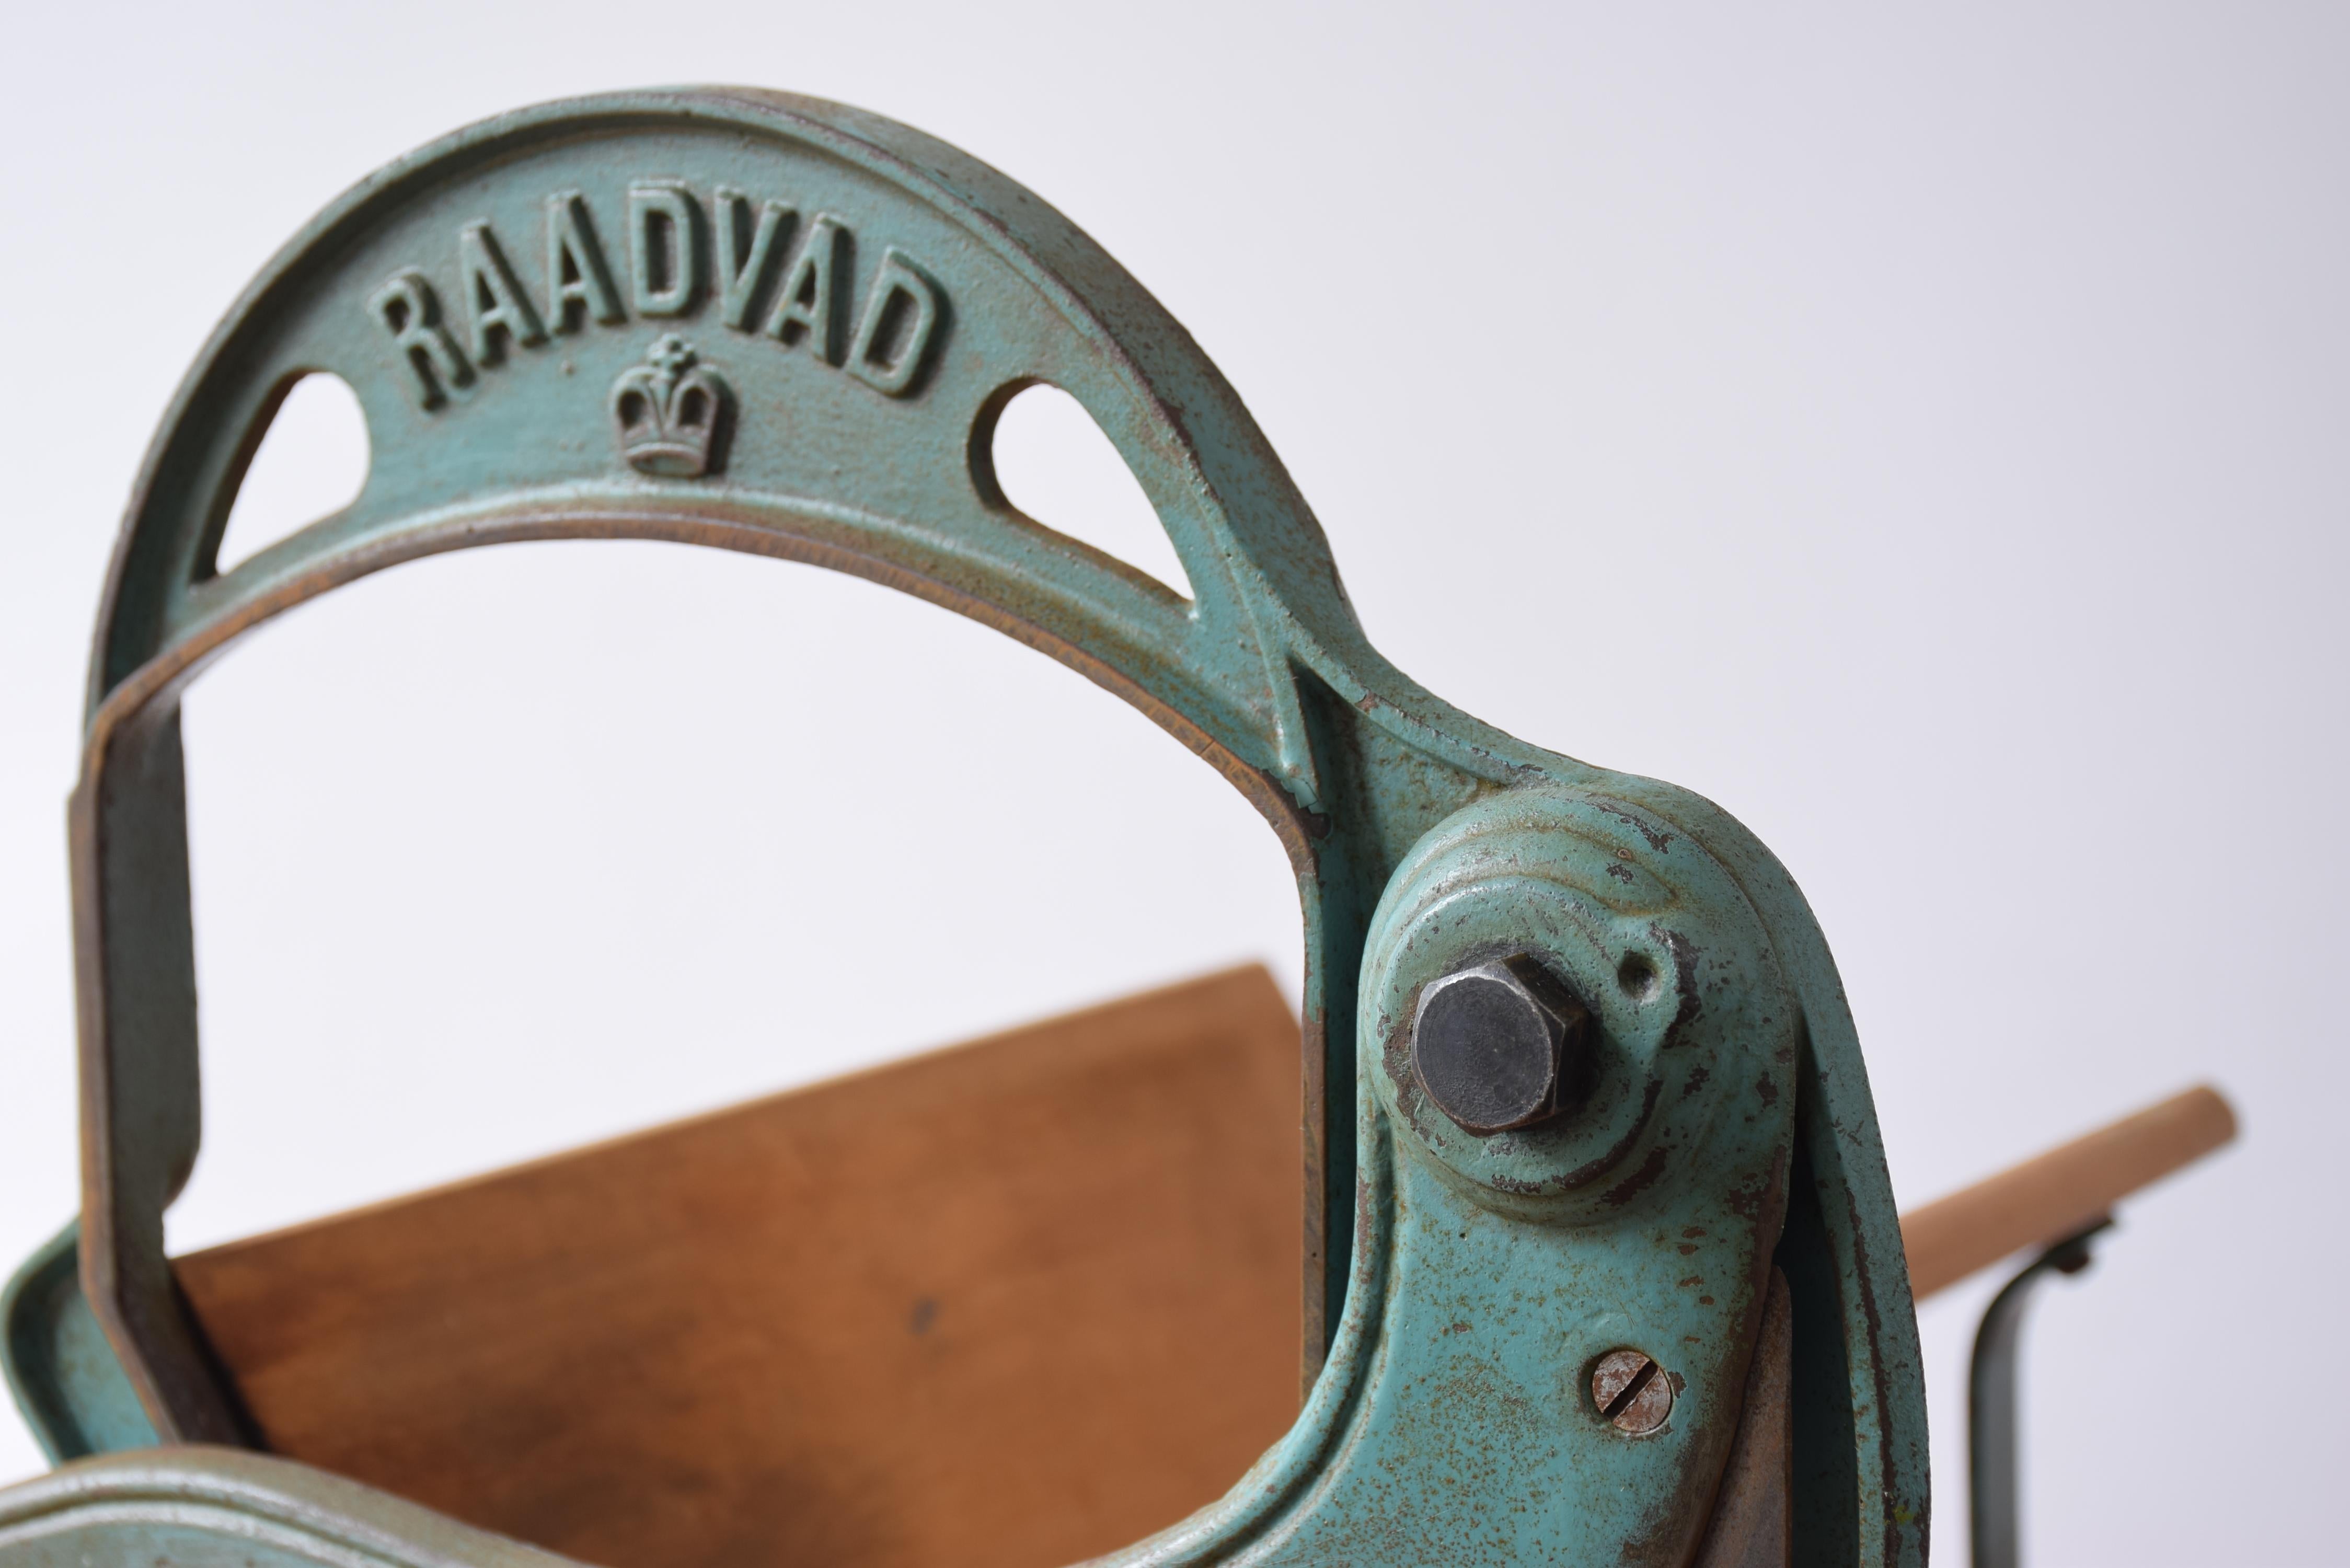 Danish Raadvad Bread Slicer Art Nouveau Style in Blue with Great Patina, 1920s For Sale 3